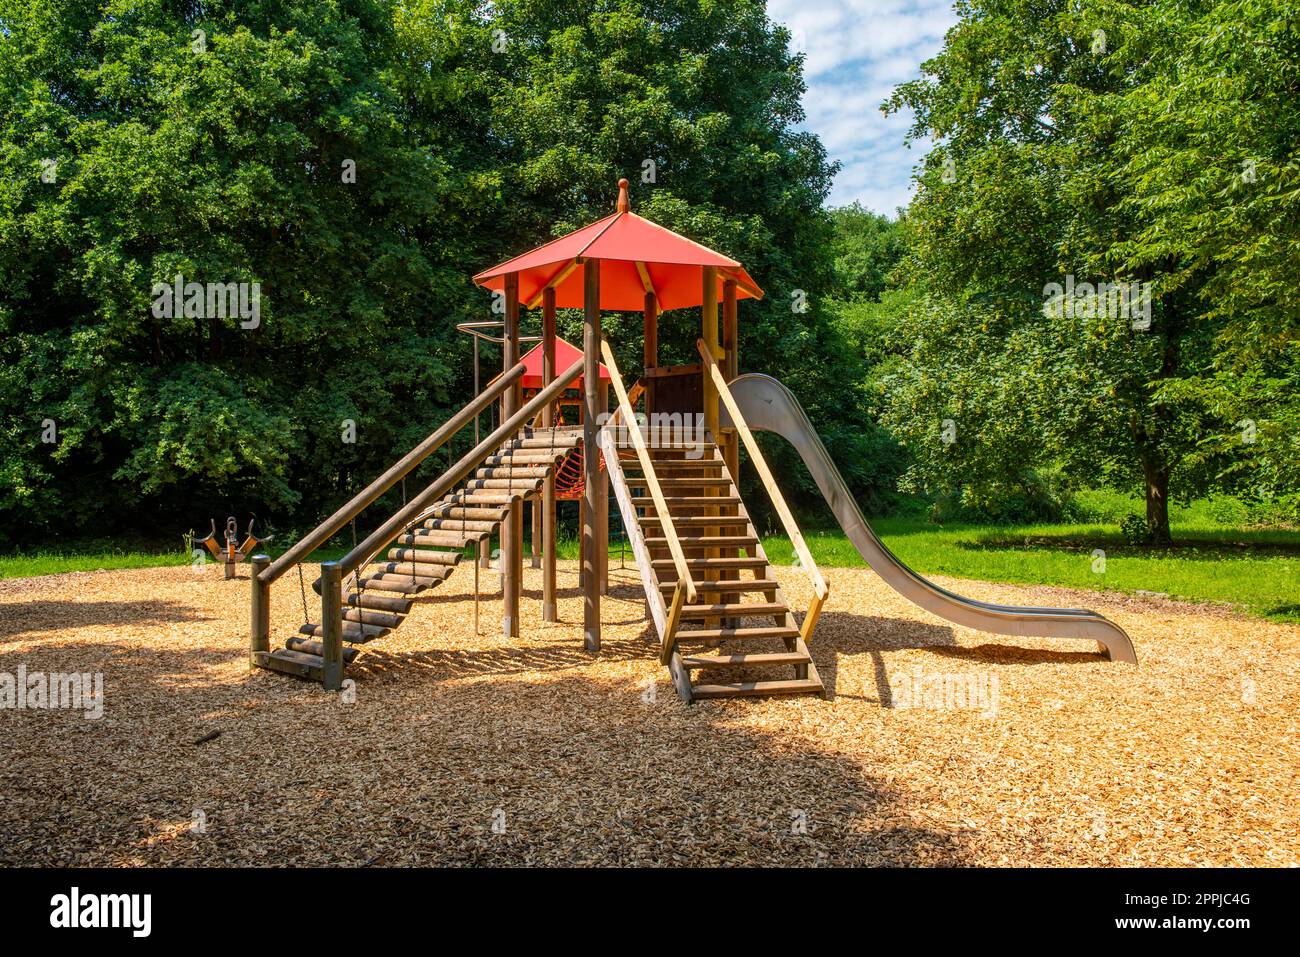 A wooden climbing castle with towers, palisades, slides, ropes and balancing bars on a deserted adventure playground Stock Photo